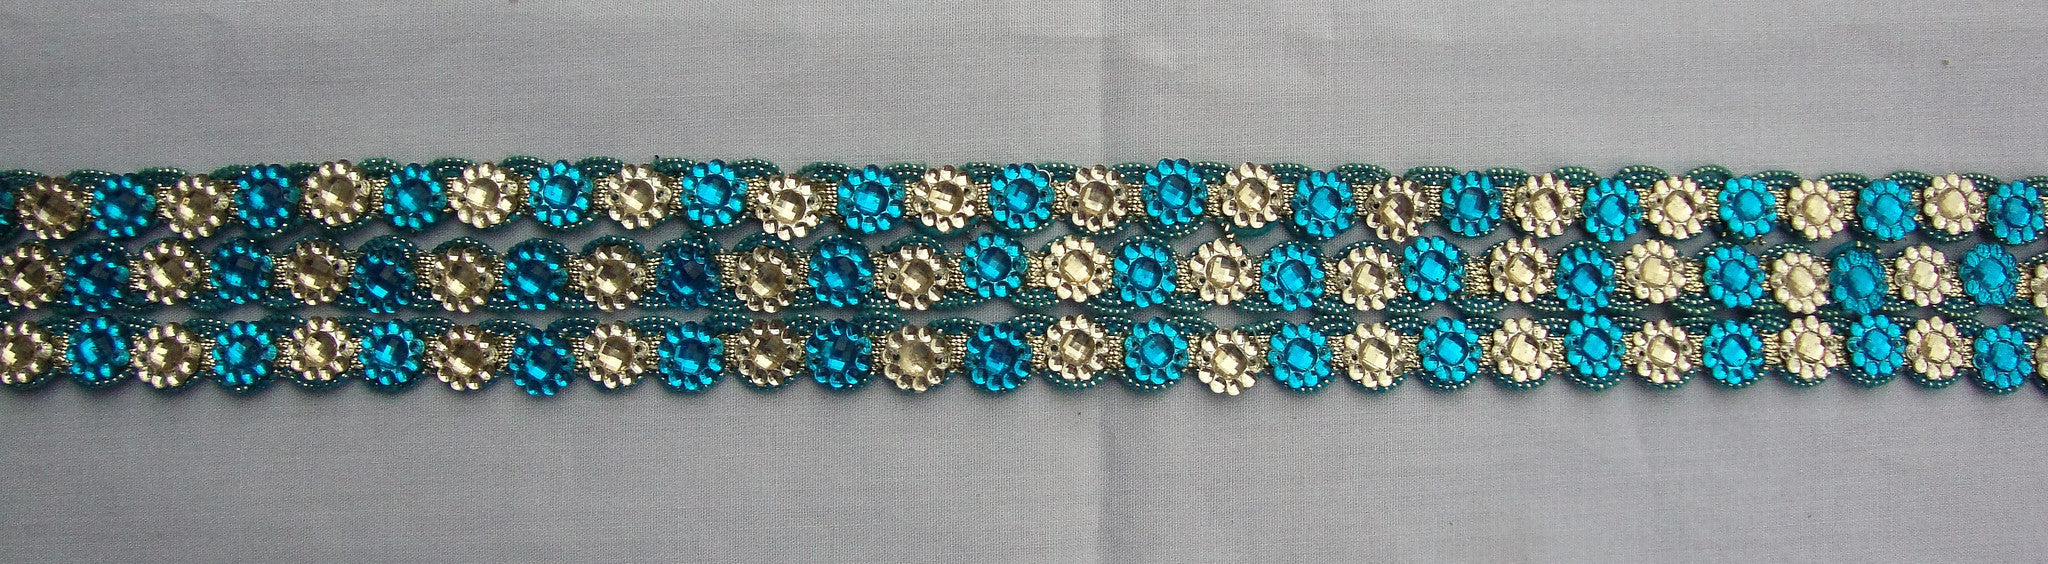 Turquoise Beaded Trimming (Sold as a 3 yard piece)